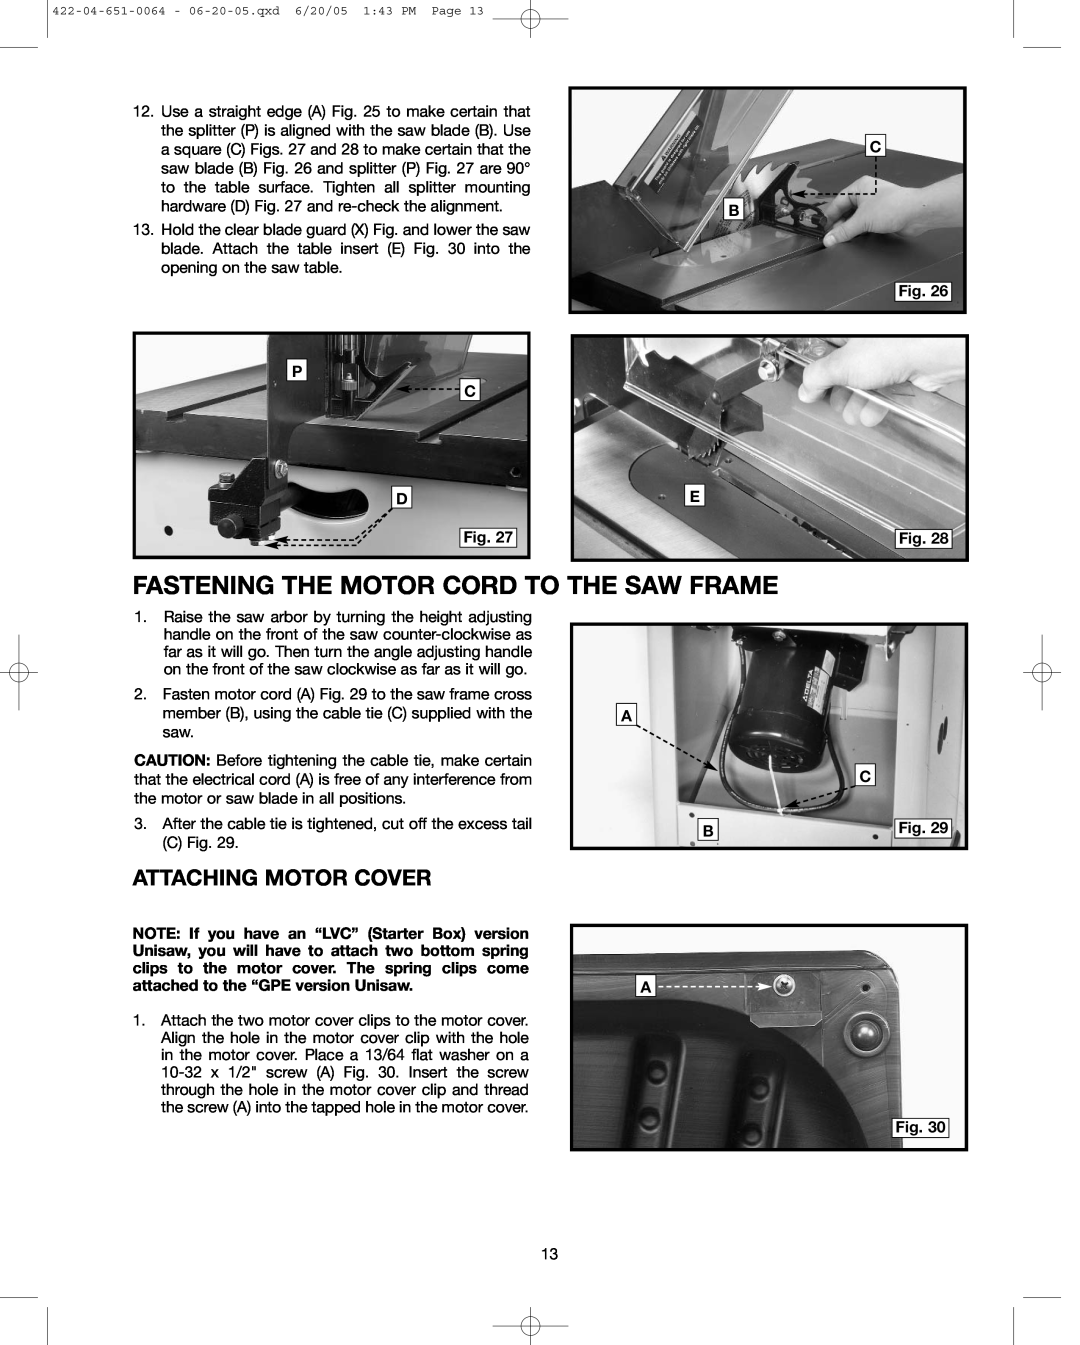 Delta 34-806, 34-814, 34-801 instruction manual Fastening The Motor Cord To The Saw Frame, Attaching Motor Cover, P C D 